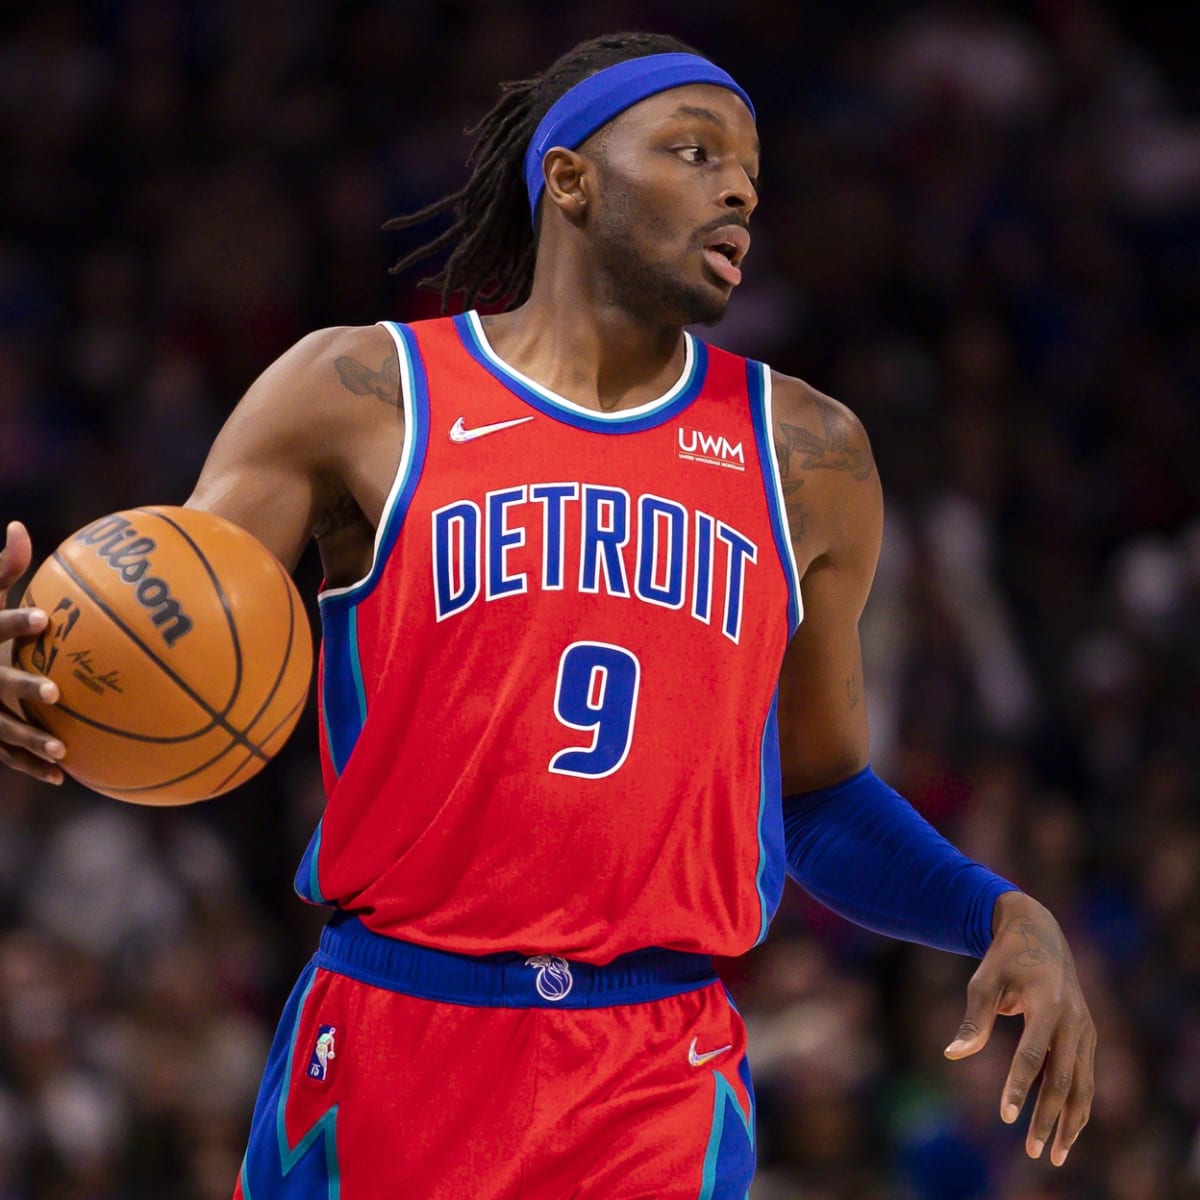 Has Jerami Grant Played His Last Game as a Detroit Piston